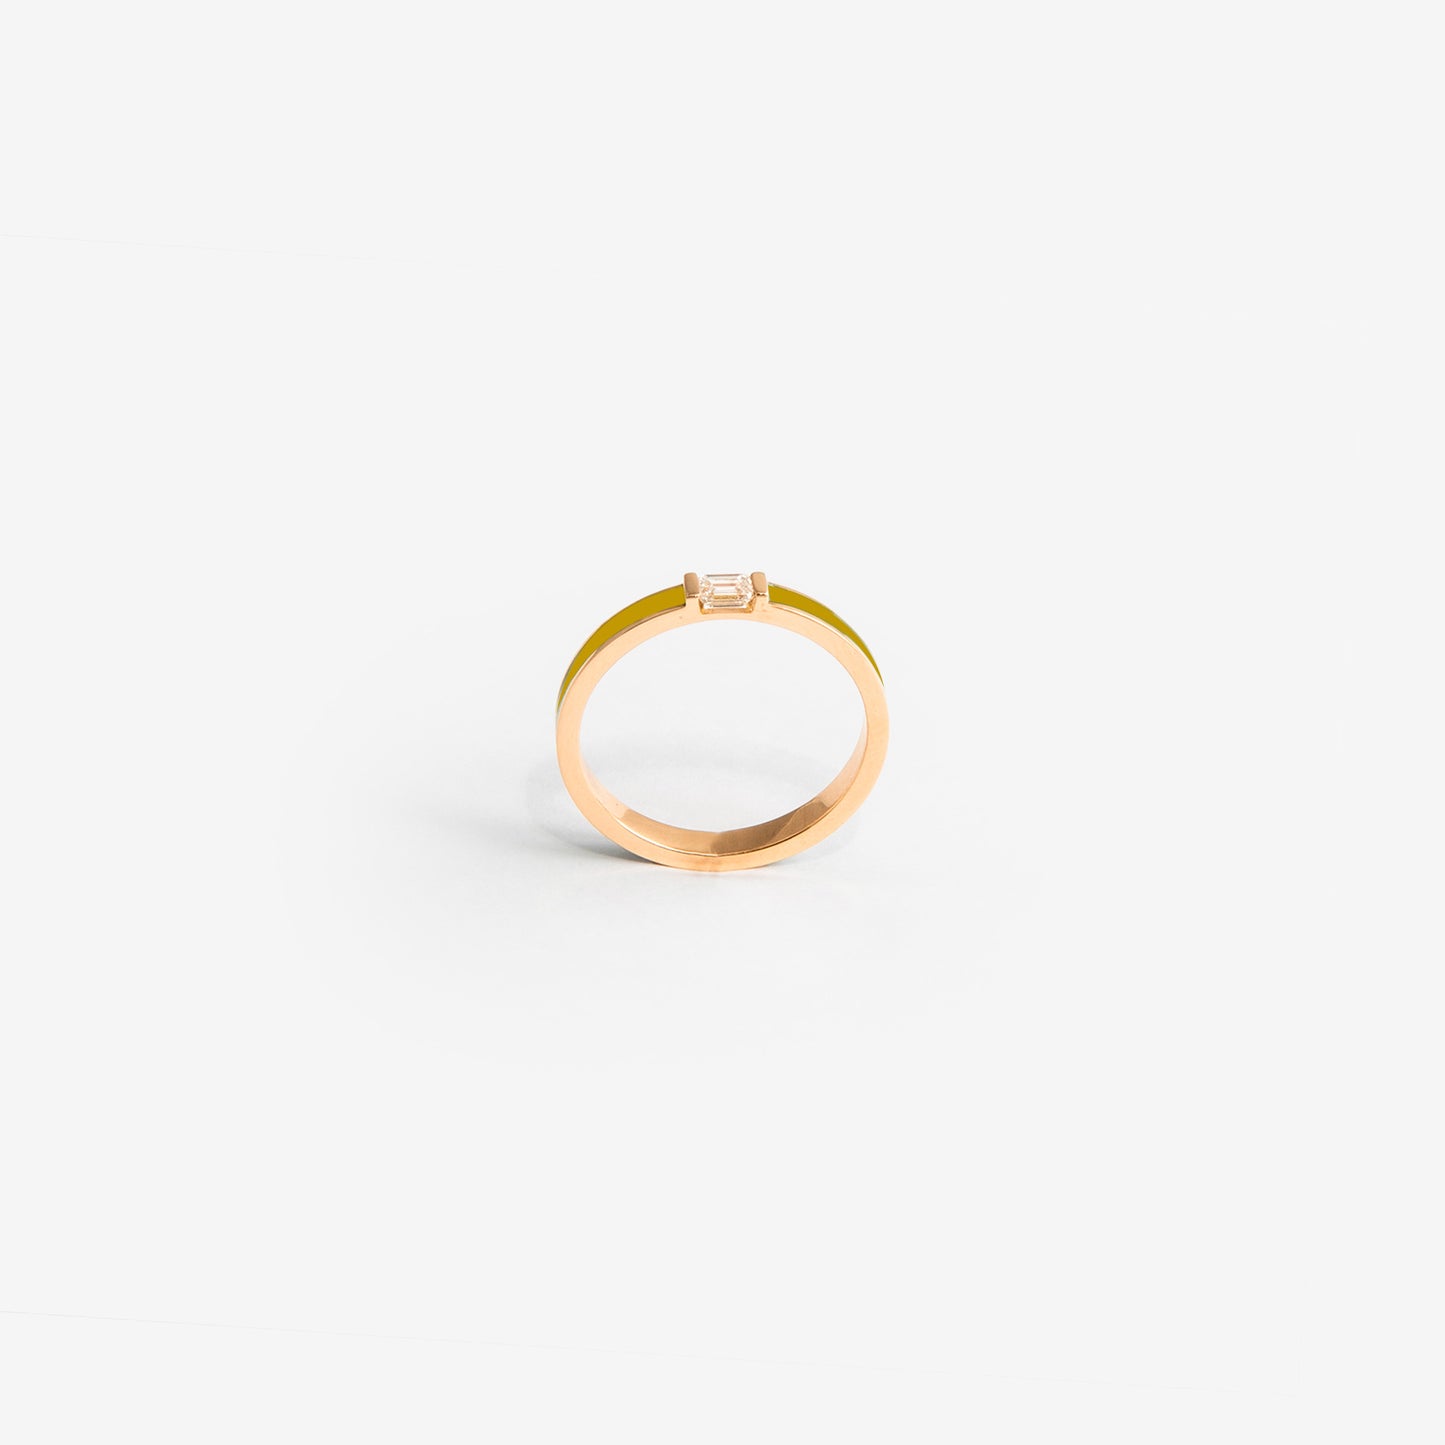 Rose gold band ring with mustard enamel and diamond